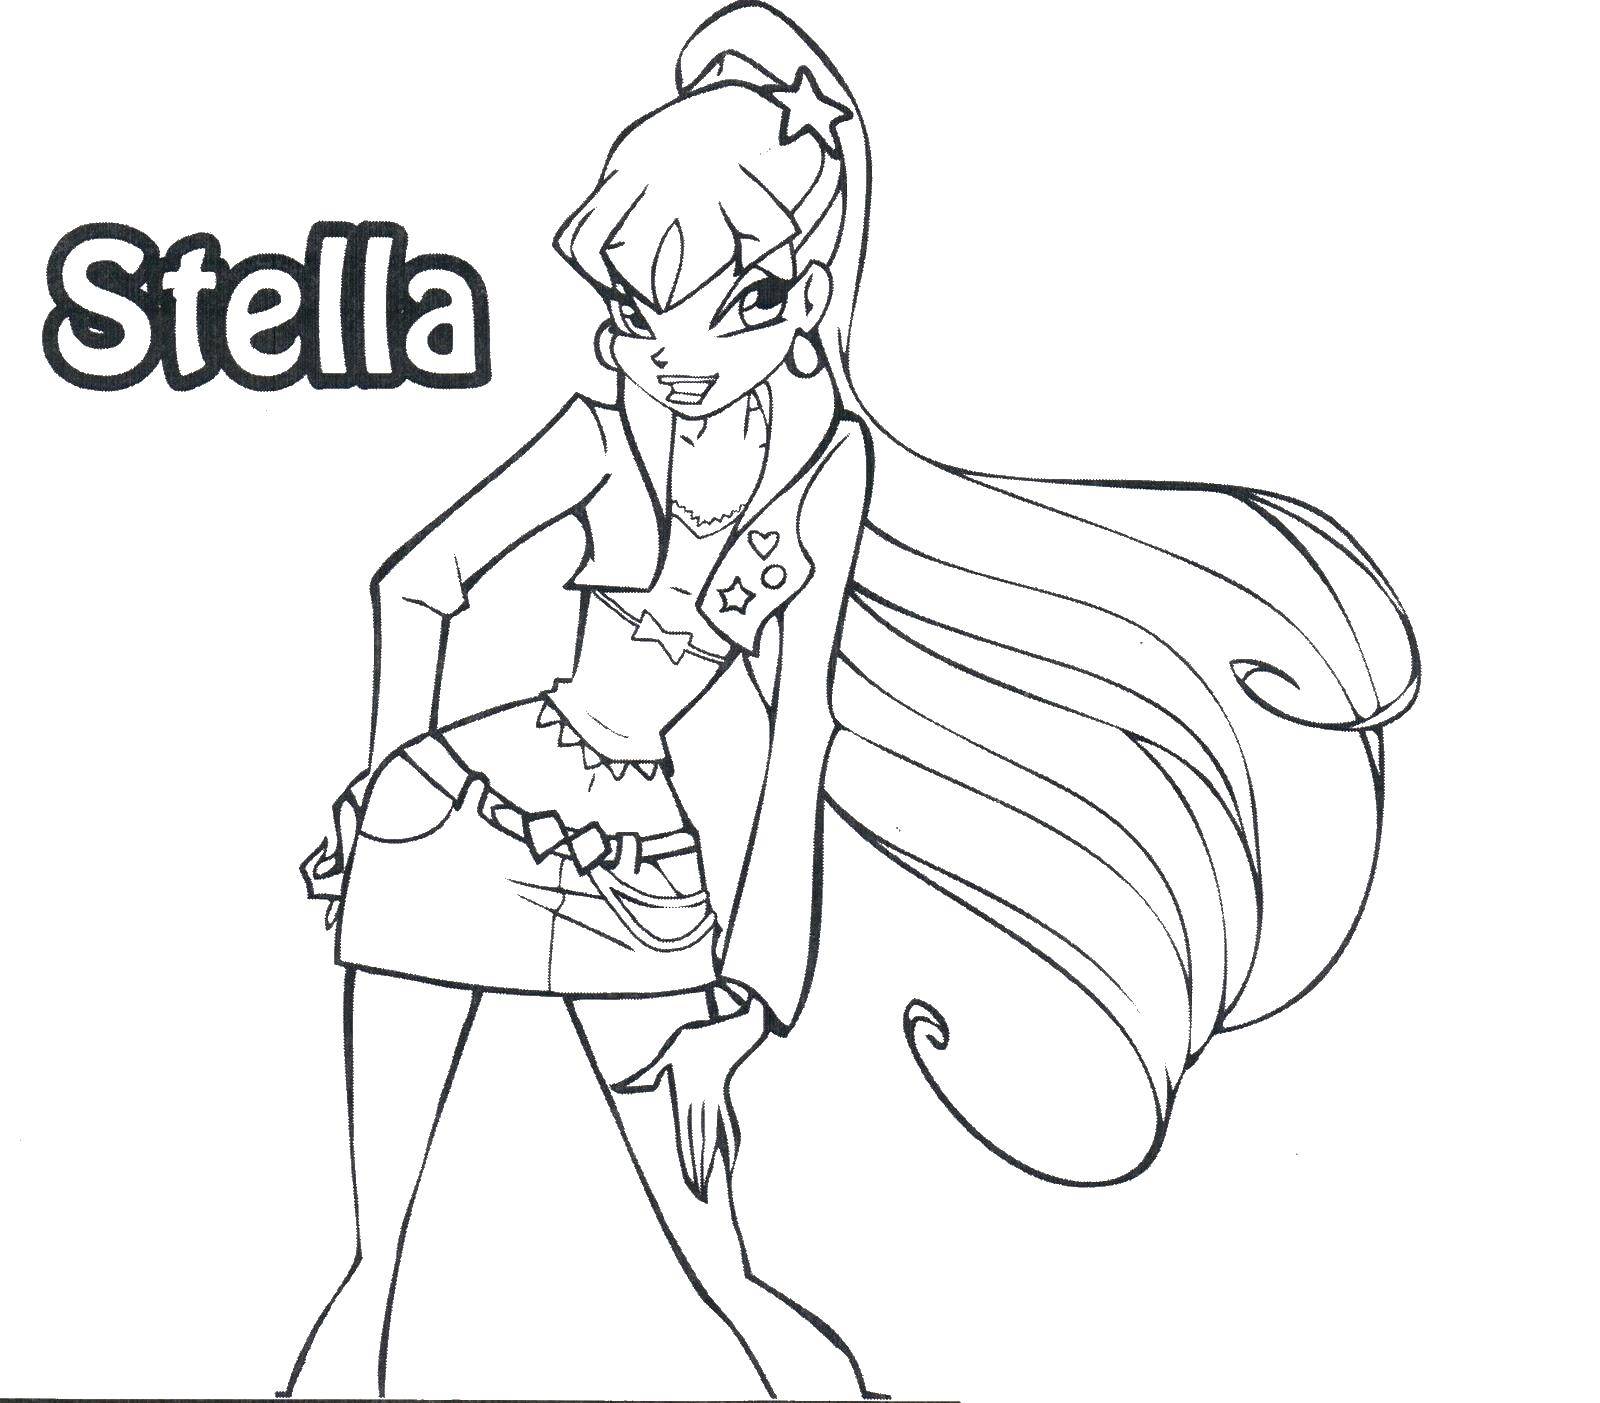 Coloring Stella from winx cartoon can be dressed. Category Winx. Tags:  Character cartoon, Winx.